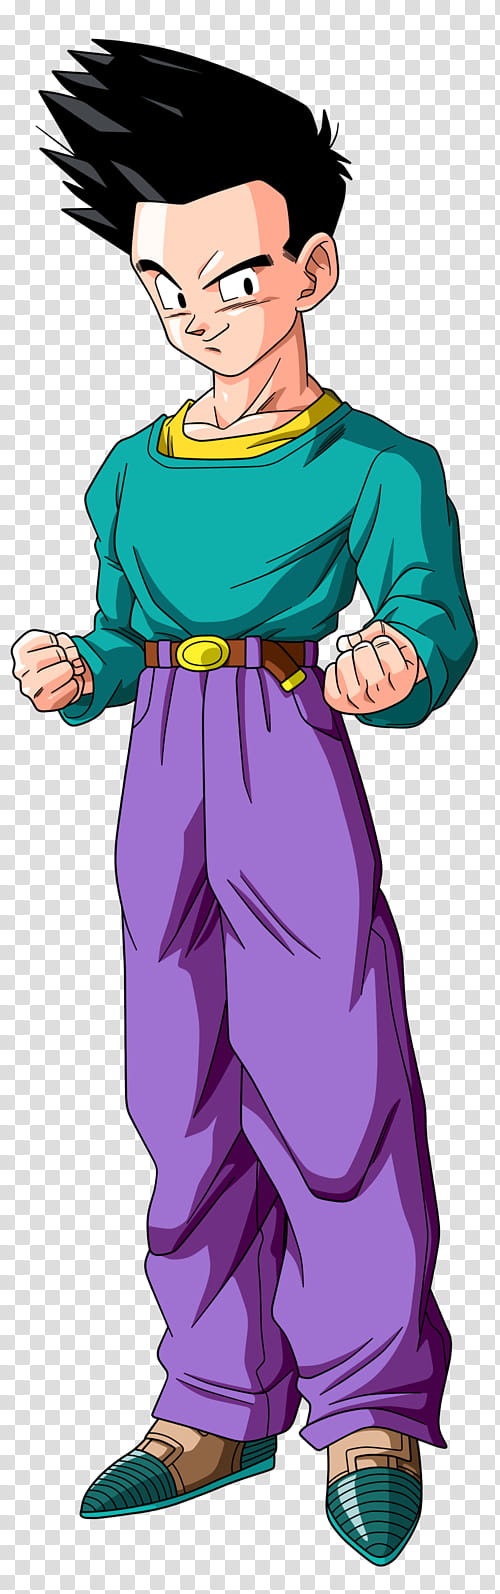 Goten Gt, Dragon Ball male character illustration transparent background PNG clipart